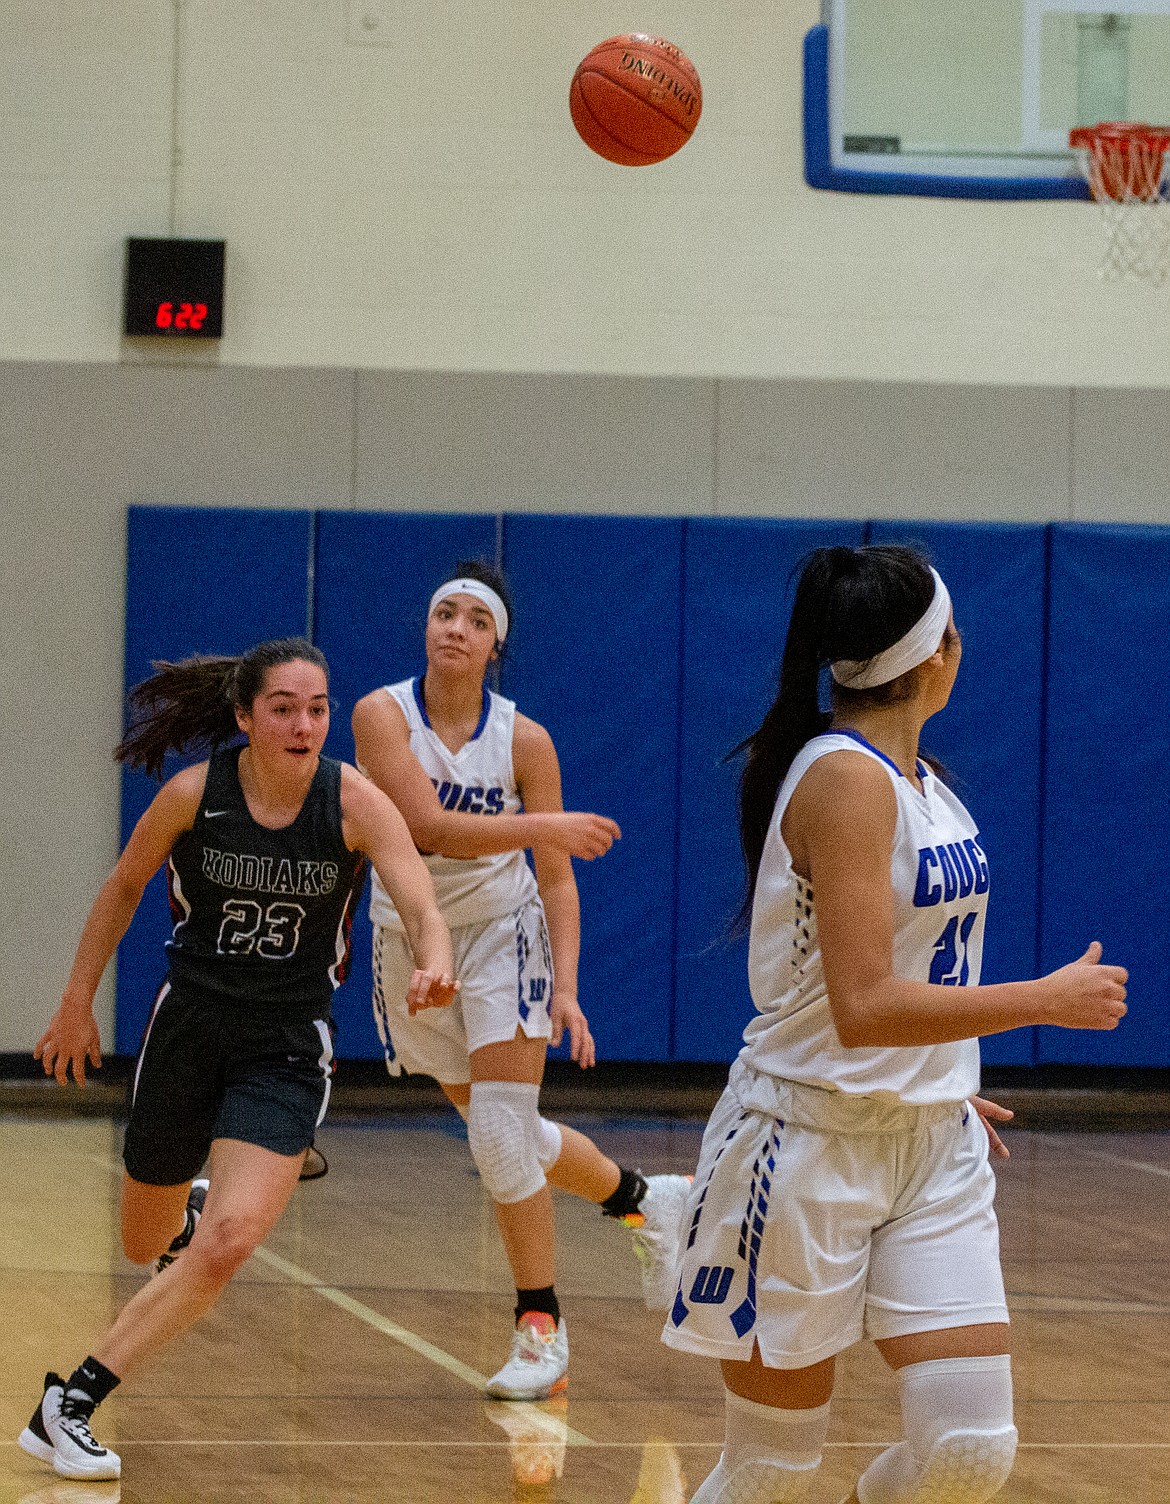 Casey McCarthy/Columbia Basin Herald Sophomore Kiana Rios finds her sister, Jlynn, sprinting down the floor on the fast break with the outlet pass.